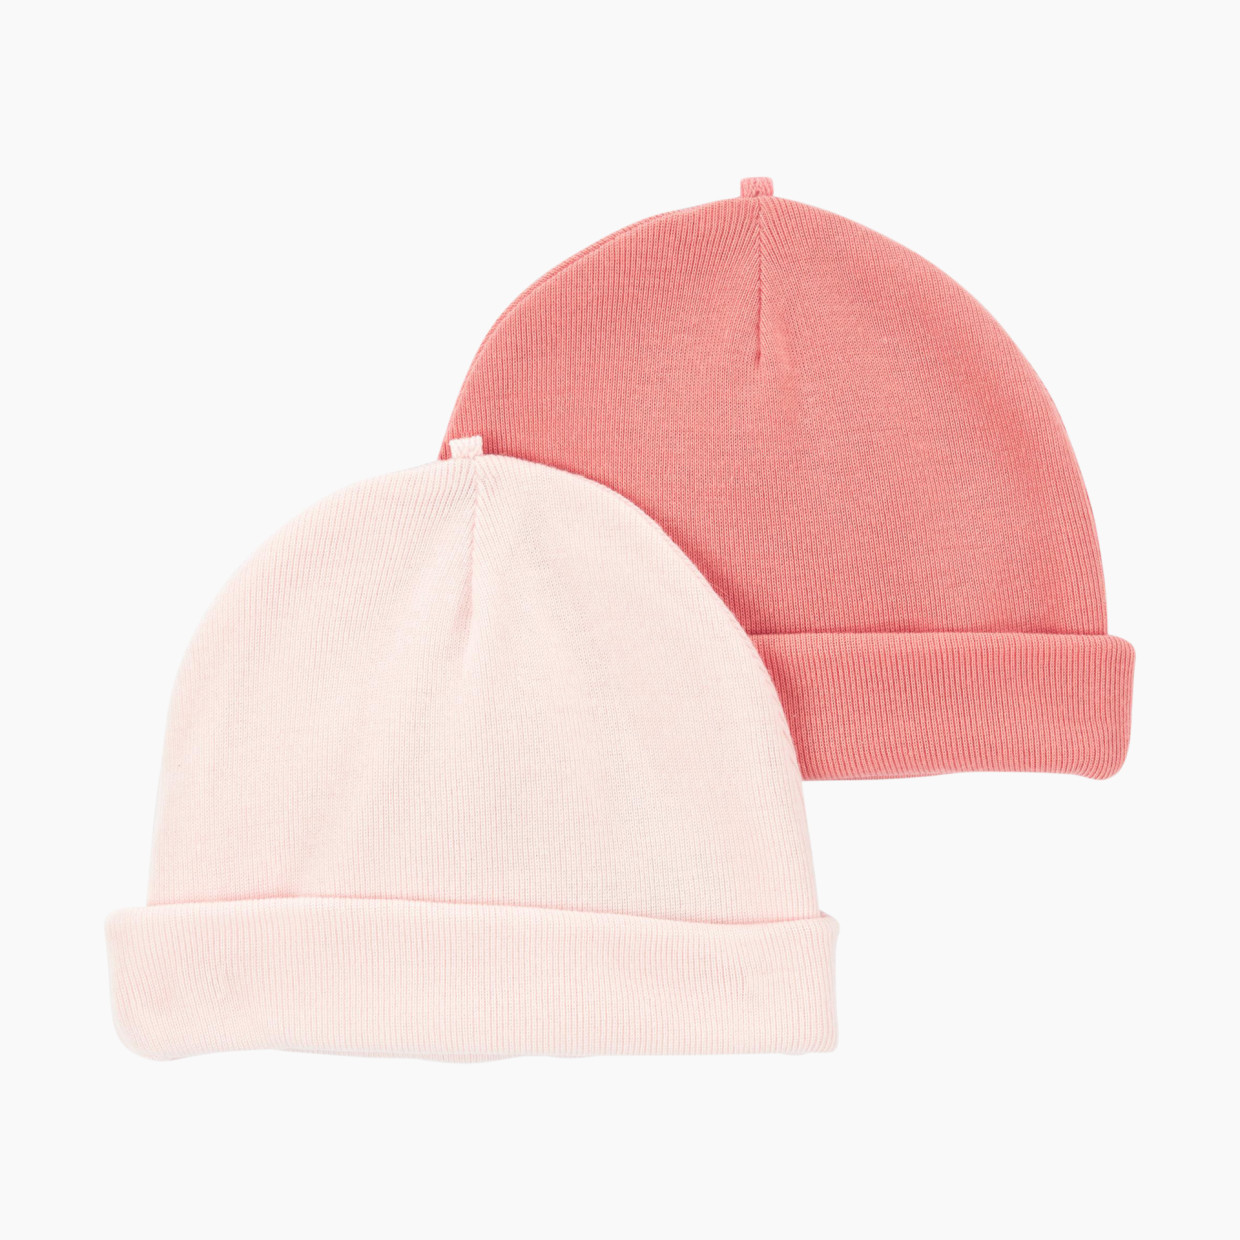 Carter's 2-Pack Caps - Pink, 0-3 M.